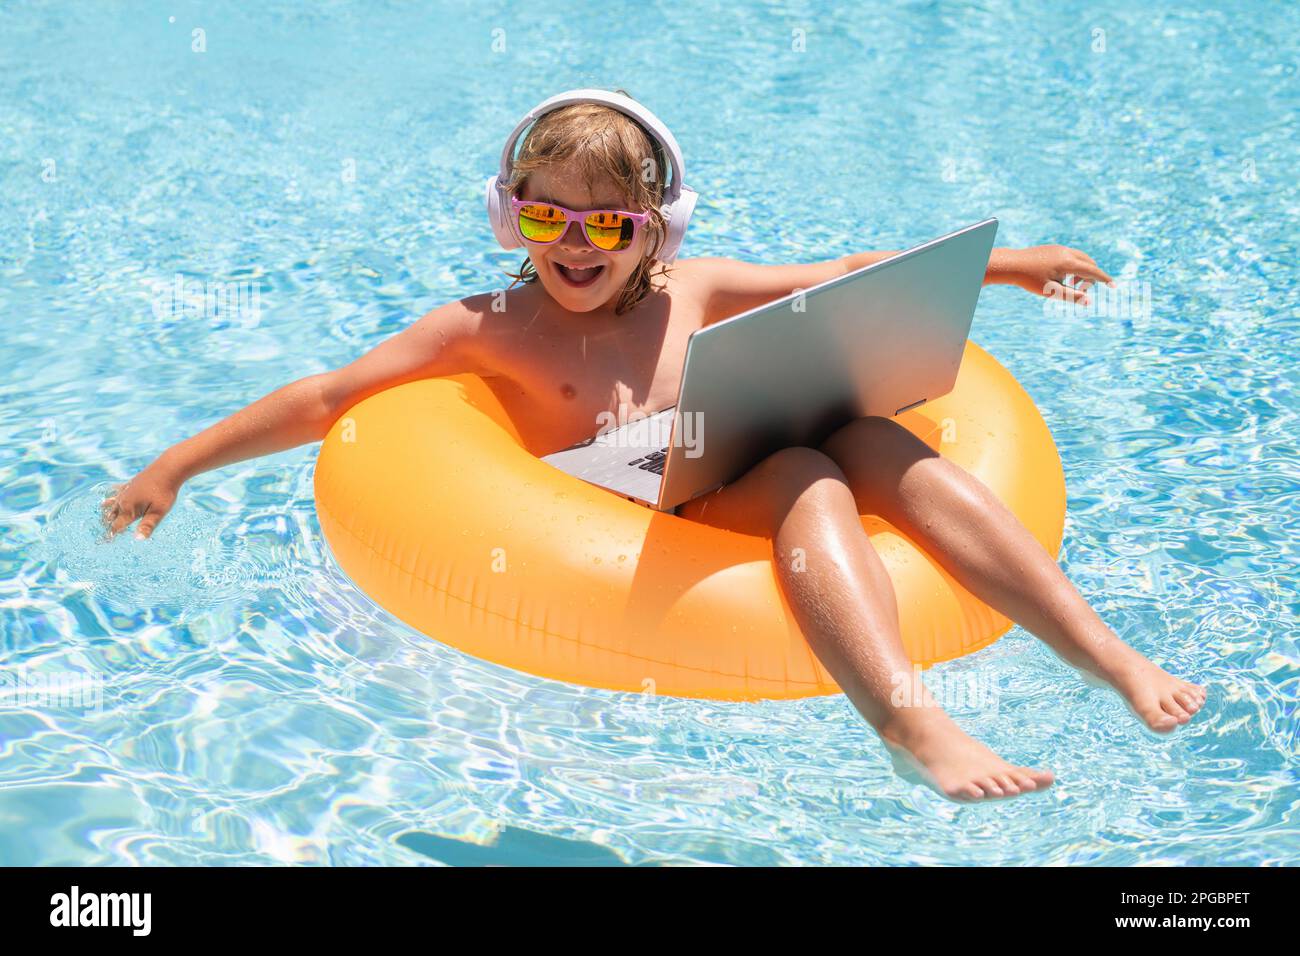 Kids working with laptop on summer vacation holidays. Little freelancer using computer, remote working in pool. Stock Photo